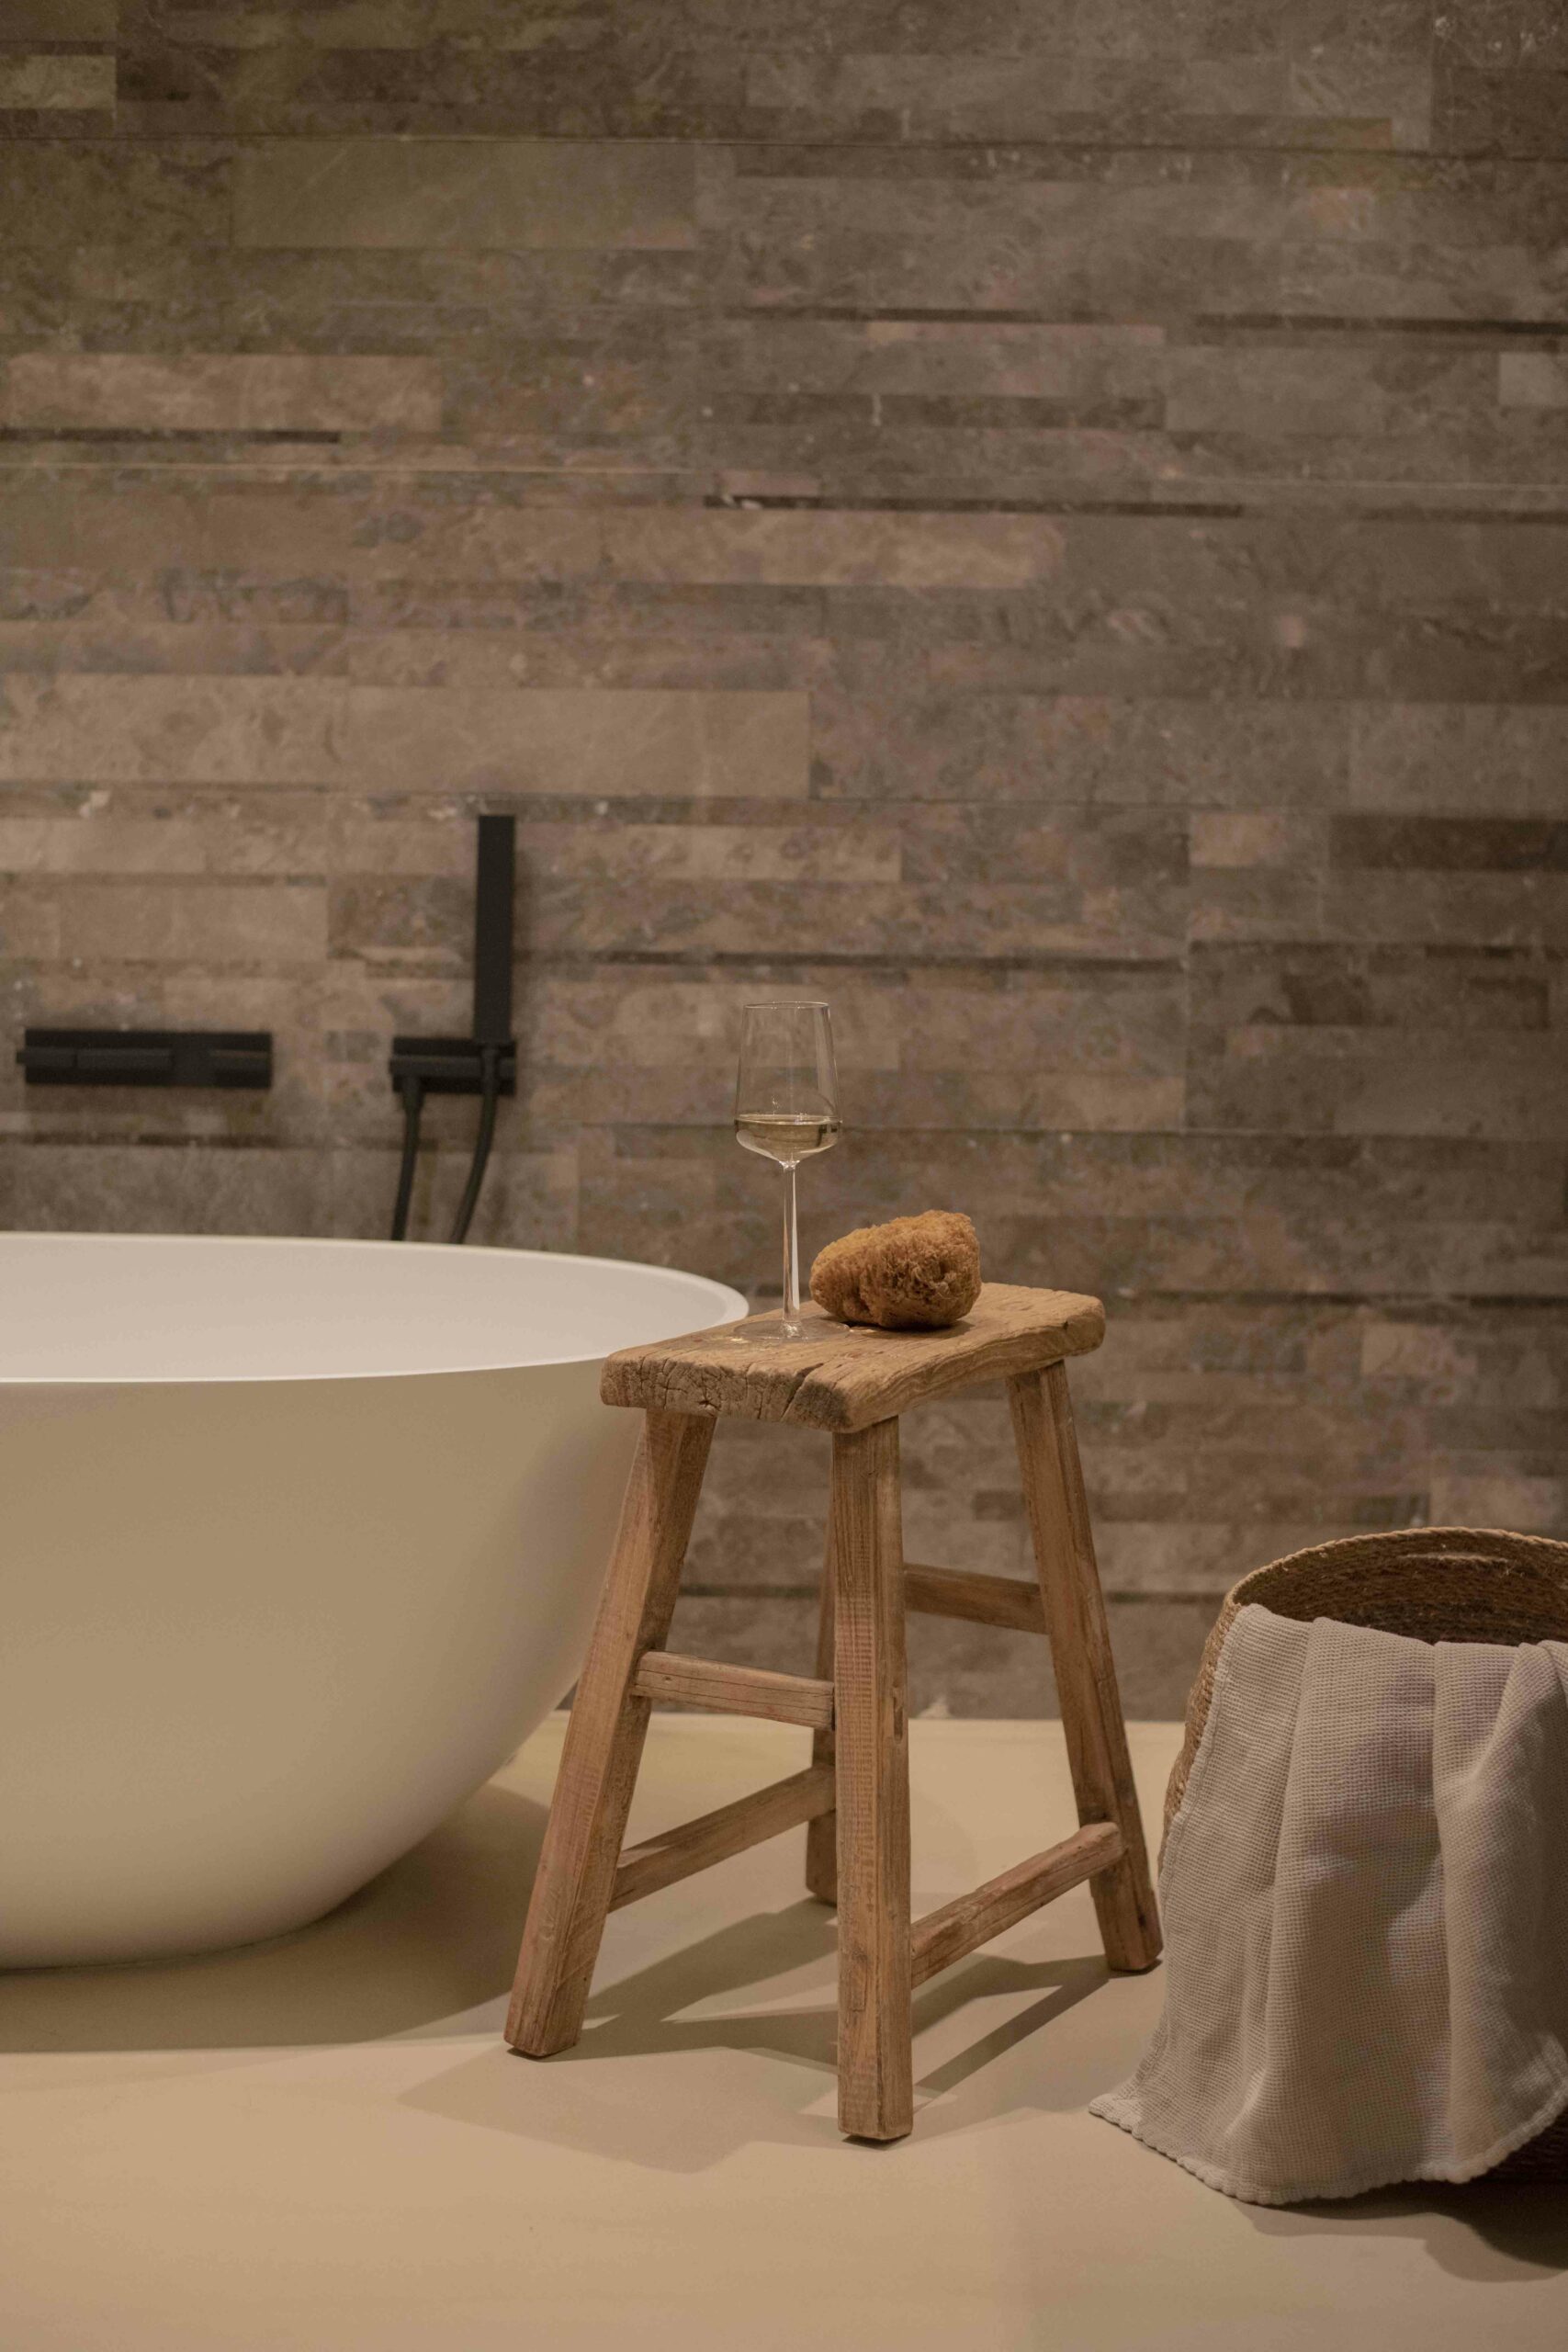 A serene bathroom setting with a stone wall backdrop. A sleek white tub is accompanied by a rustic wooden stool holding a glass of wine and a natural sponge, with a woven basket nearby.